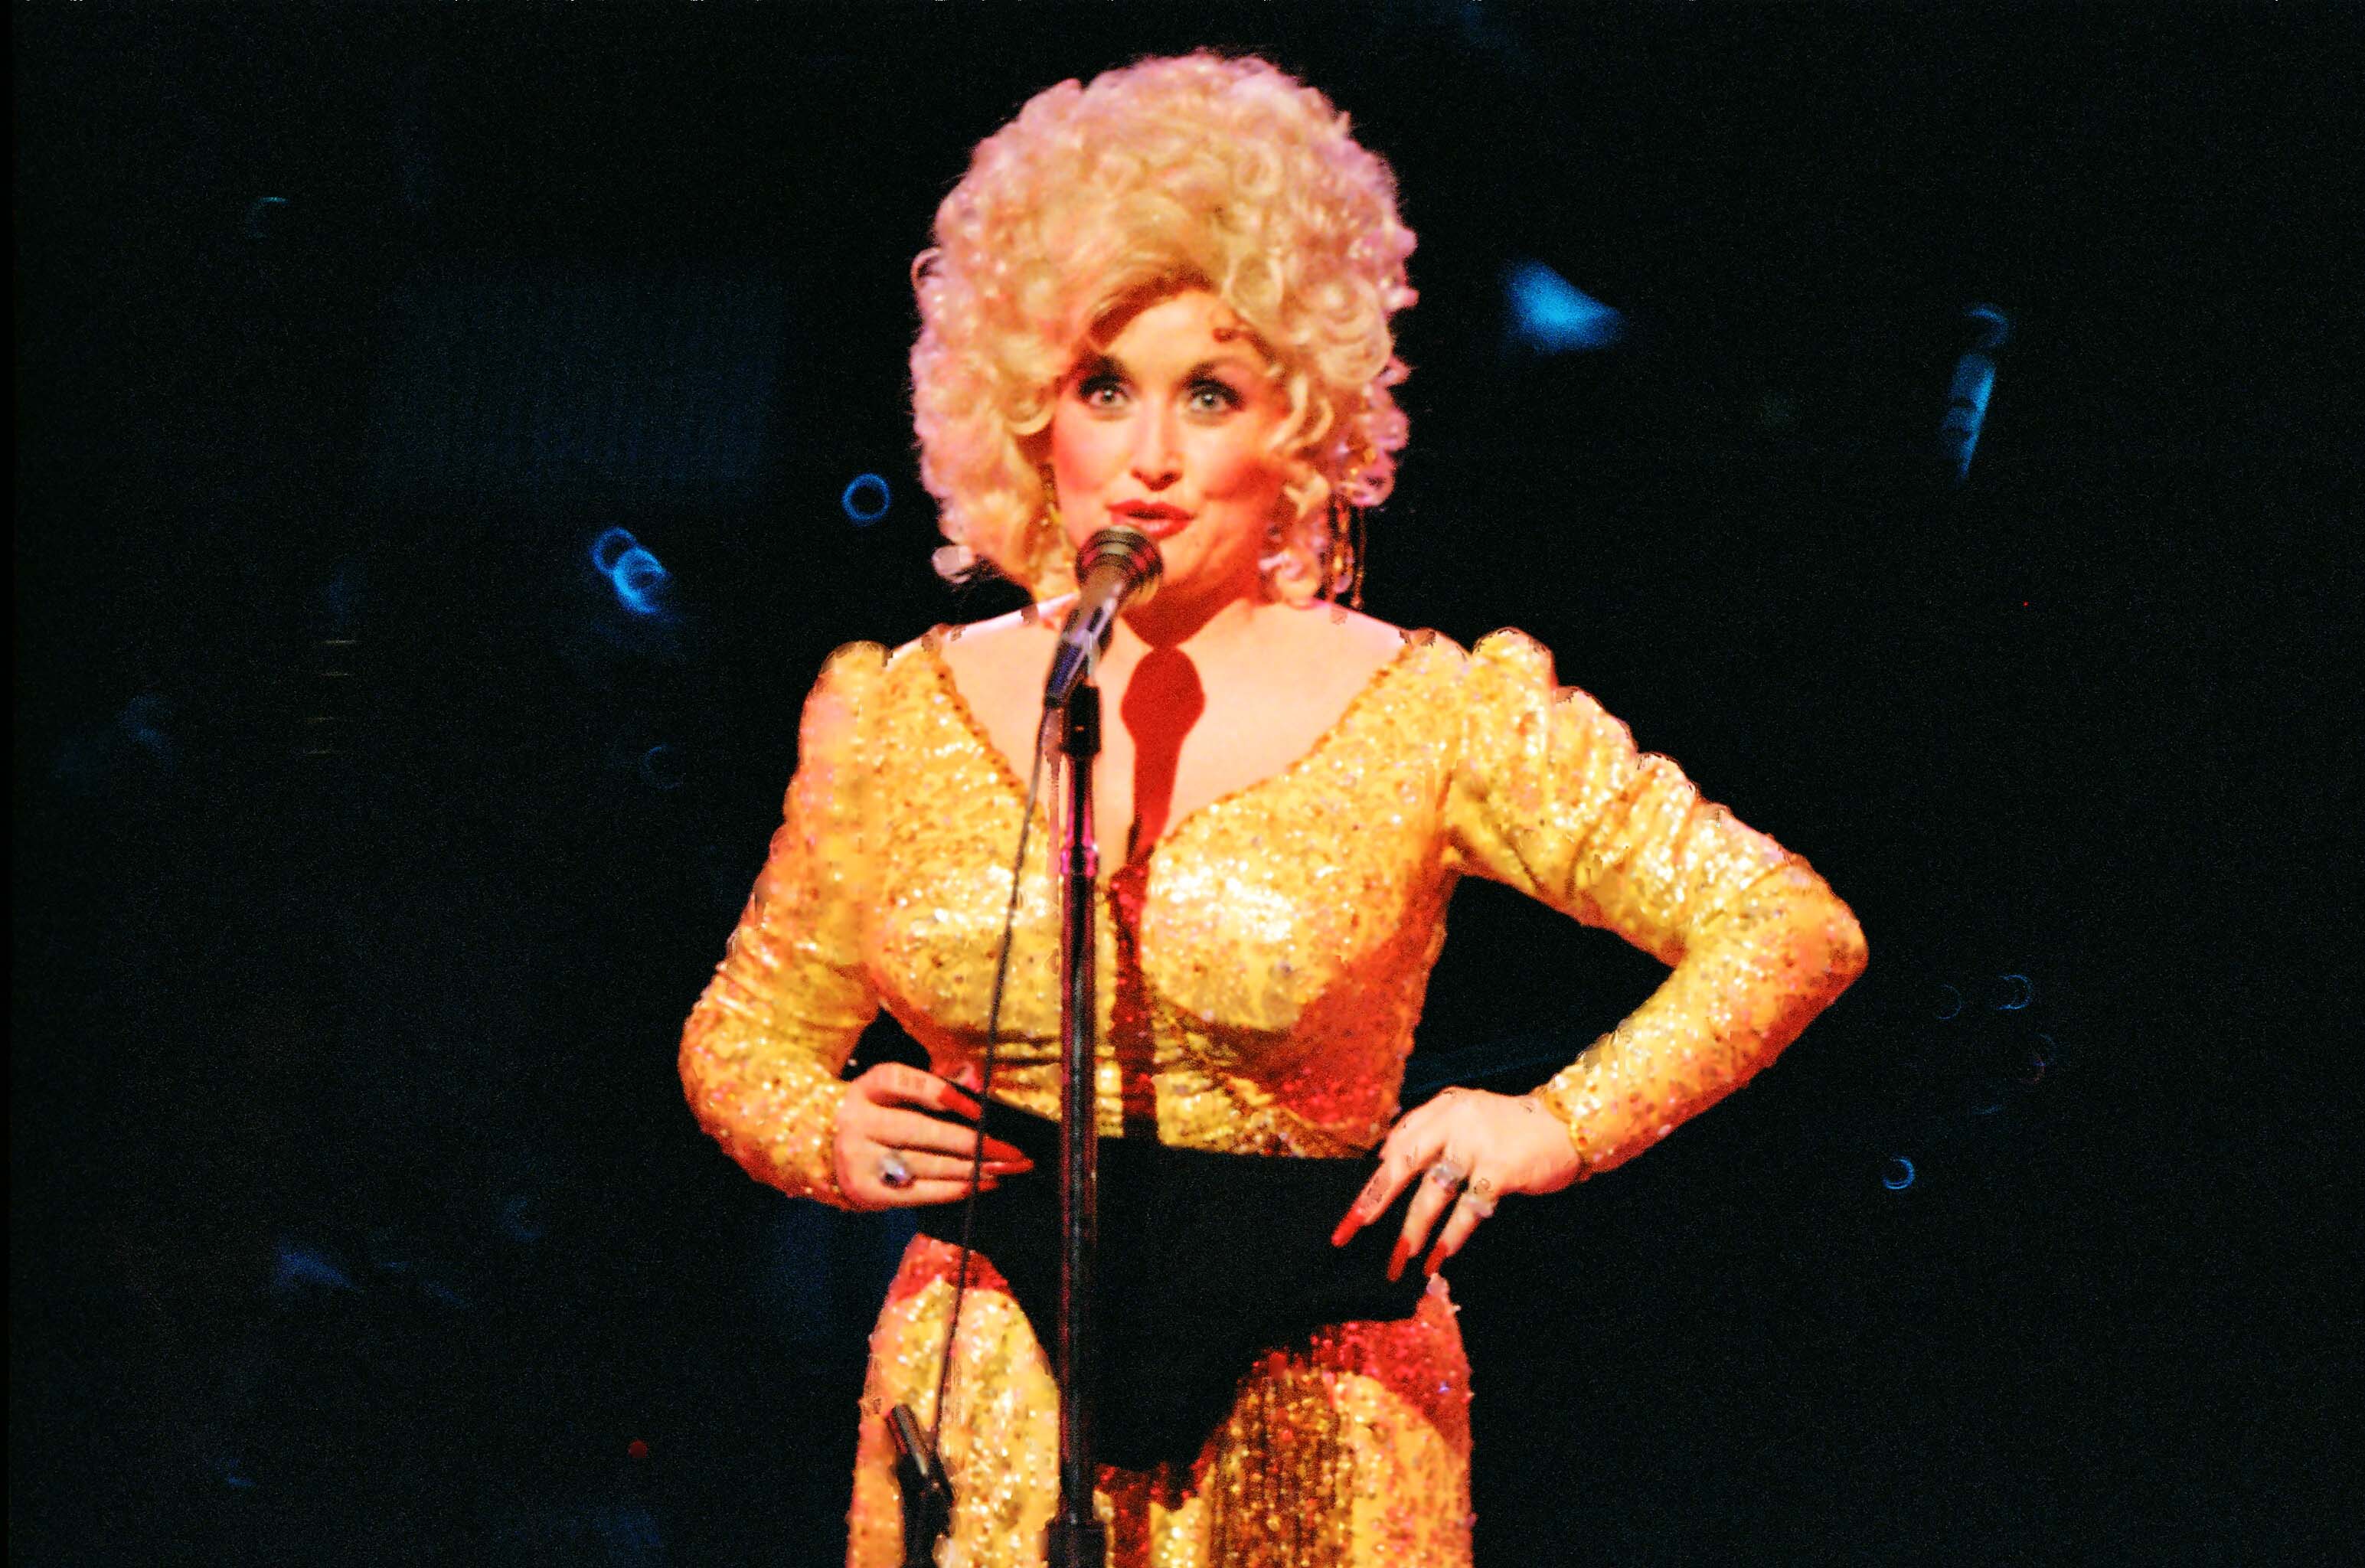 Dolly Parton stands on stage in a gold dress. She's speaking into a microphone and hold black underwear.